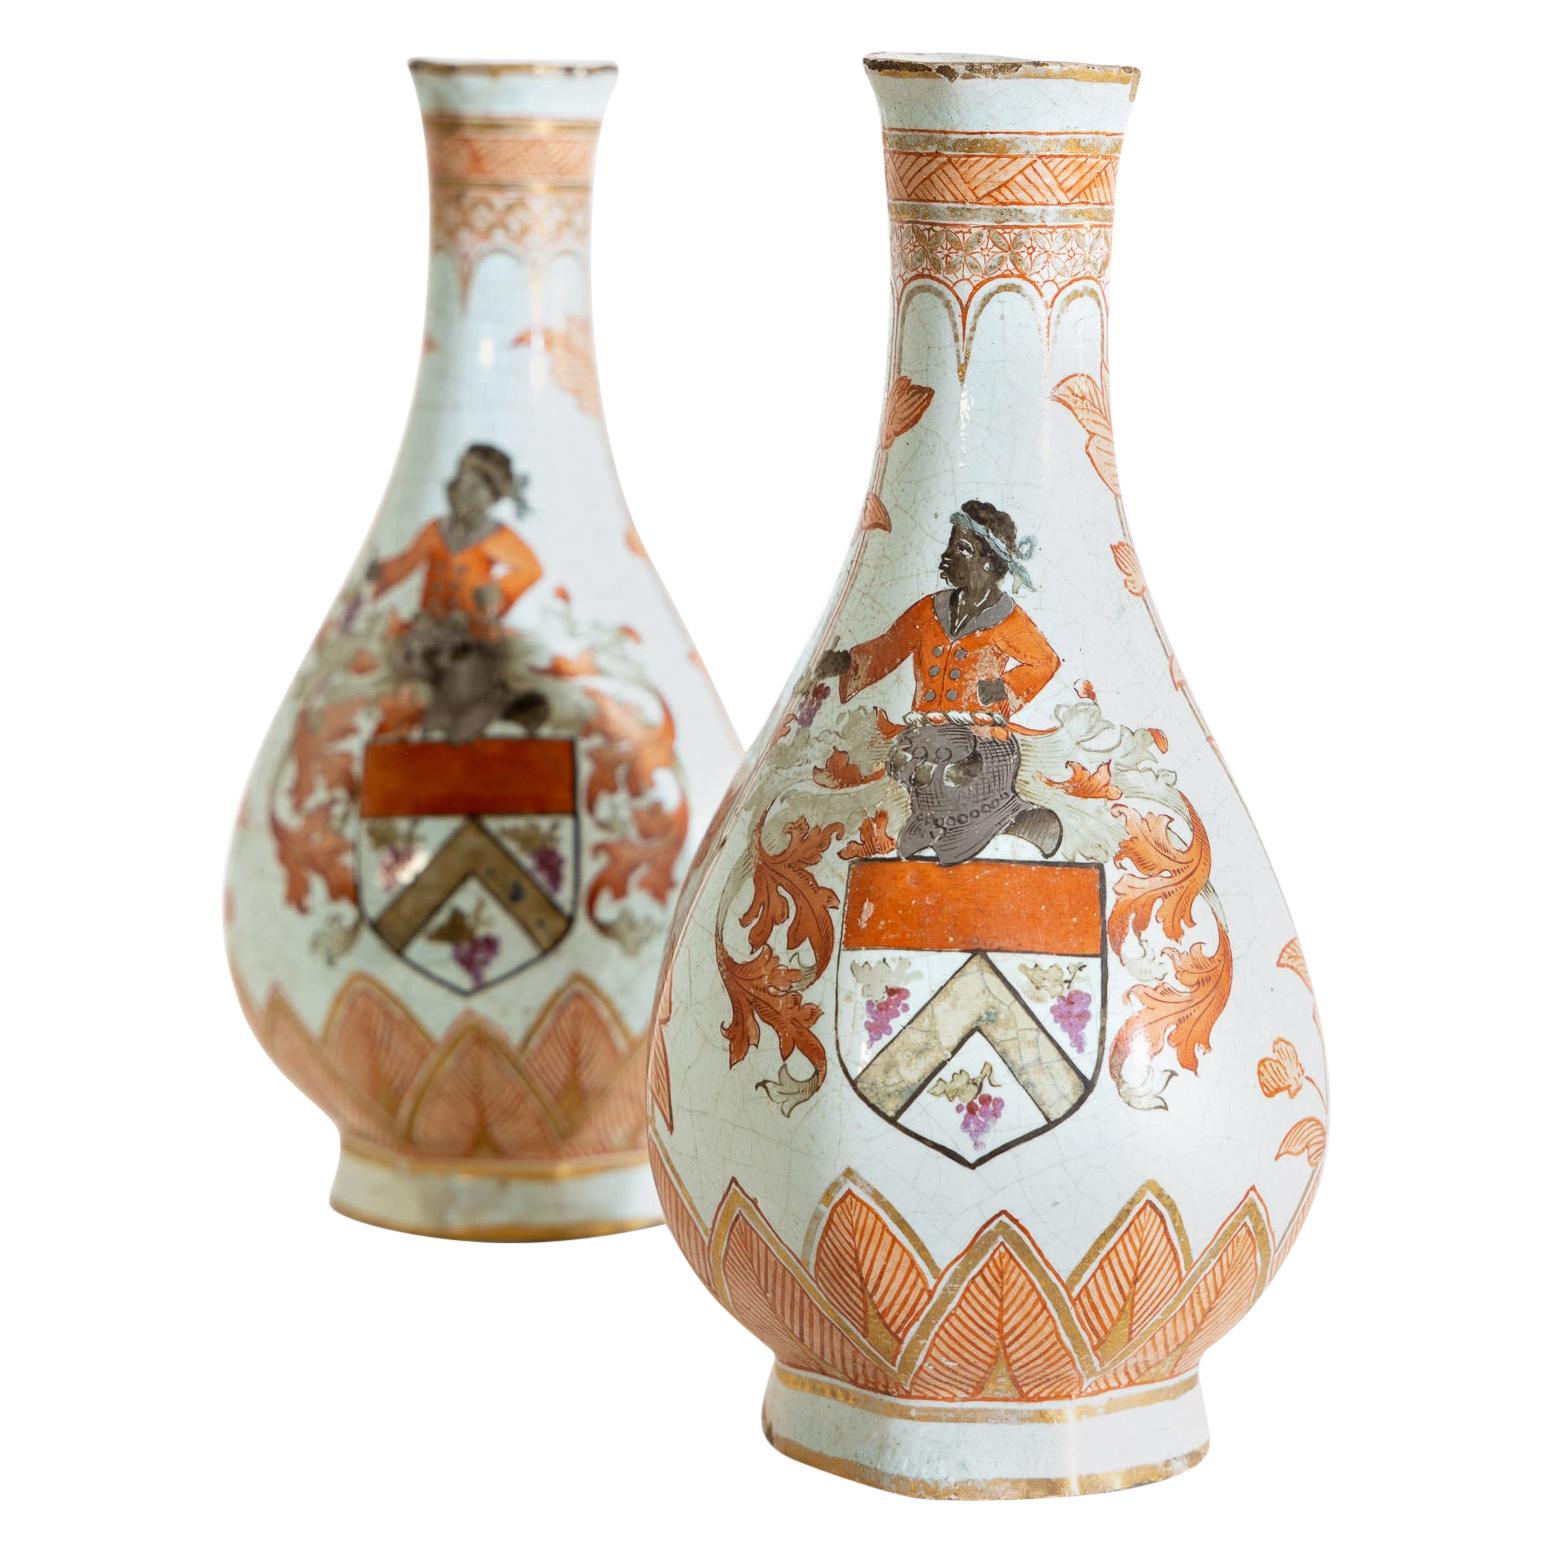 Pair of Ceramic Vases, Probably Holland, 18th-19th Century